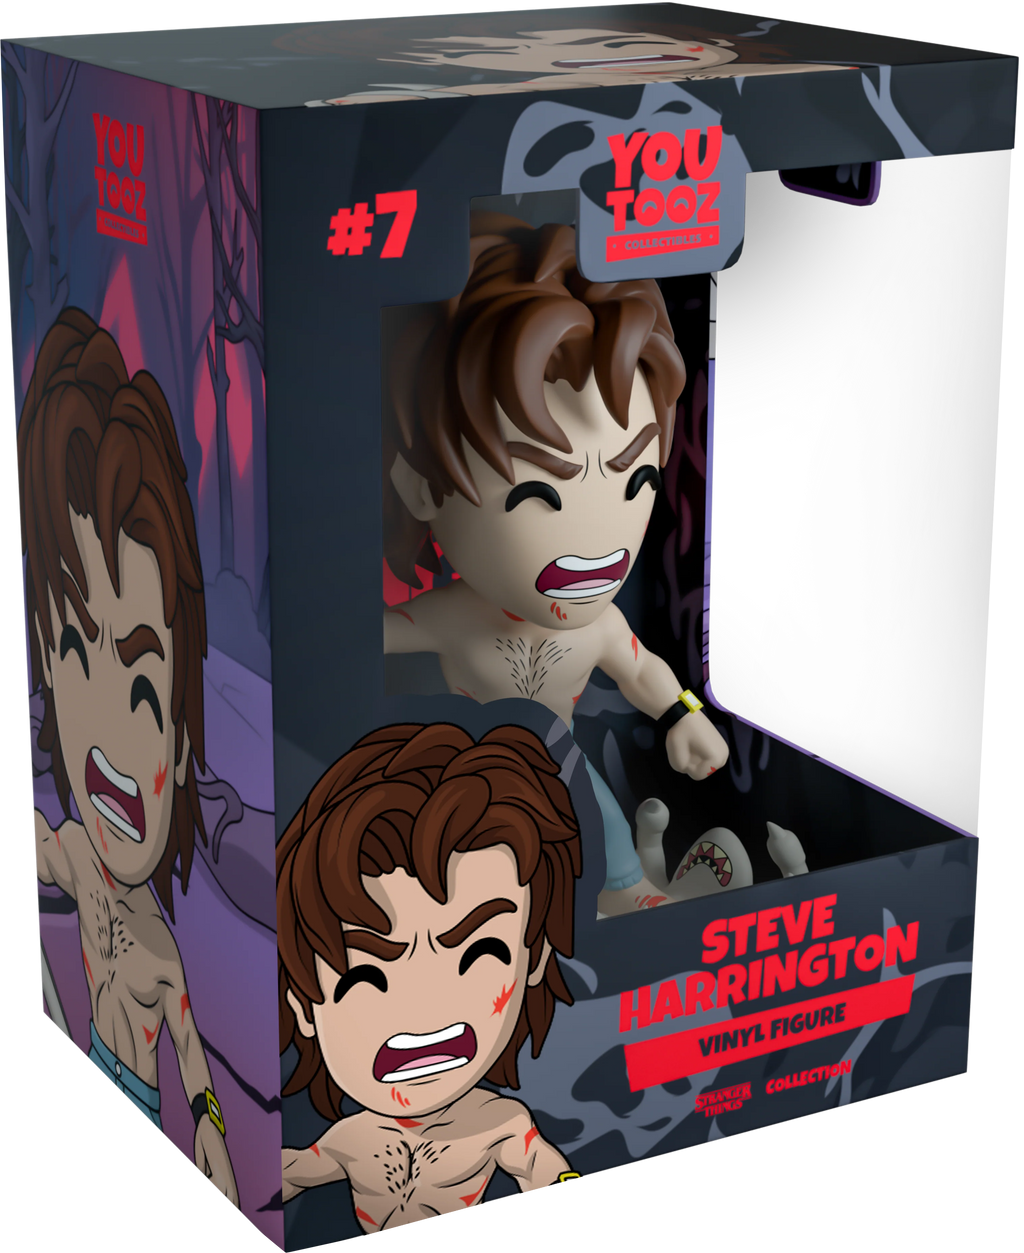 Stranger Things - STEVE Harrington Boxed Vinyl Figure by YouTooz Collectibles